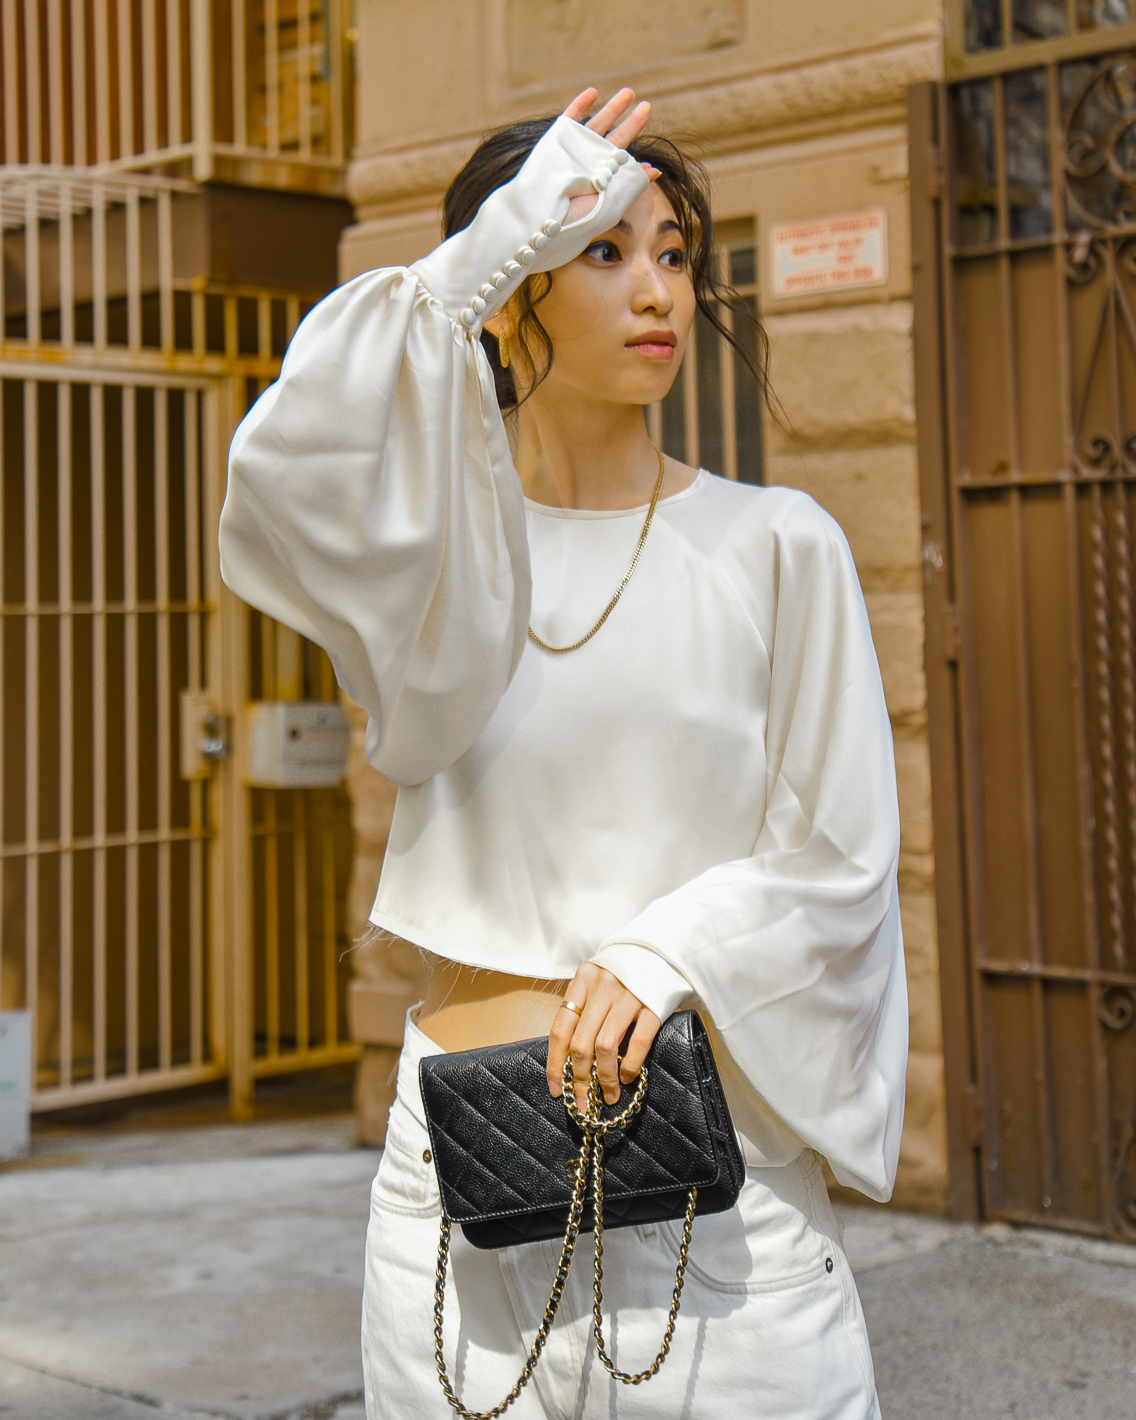 Orseund Iris Drama Cropped Satin Blouse in cream with AgoldE cross-over denim and sneakers casual style in Upper West Side New York City - FOREVERVANNY.com